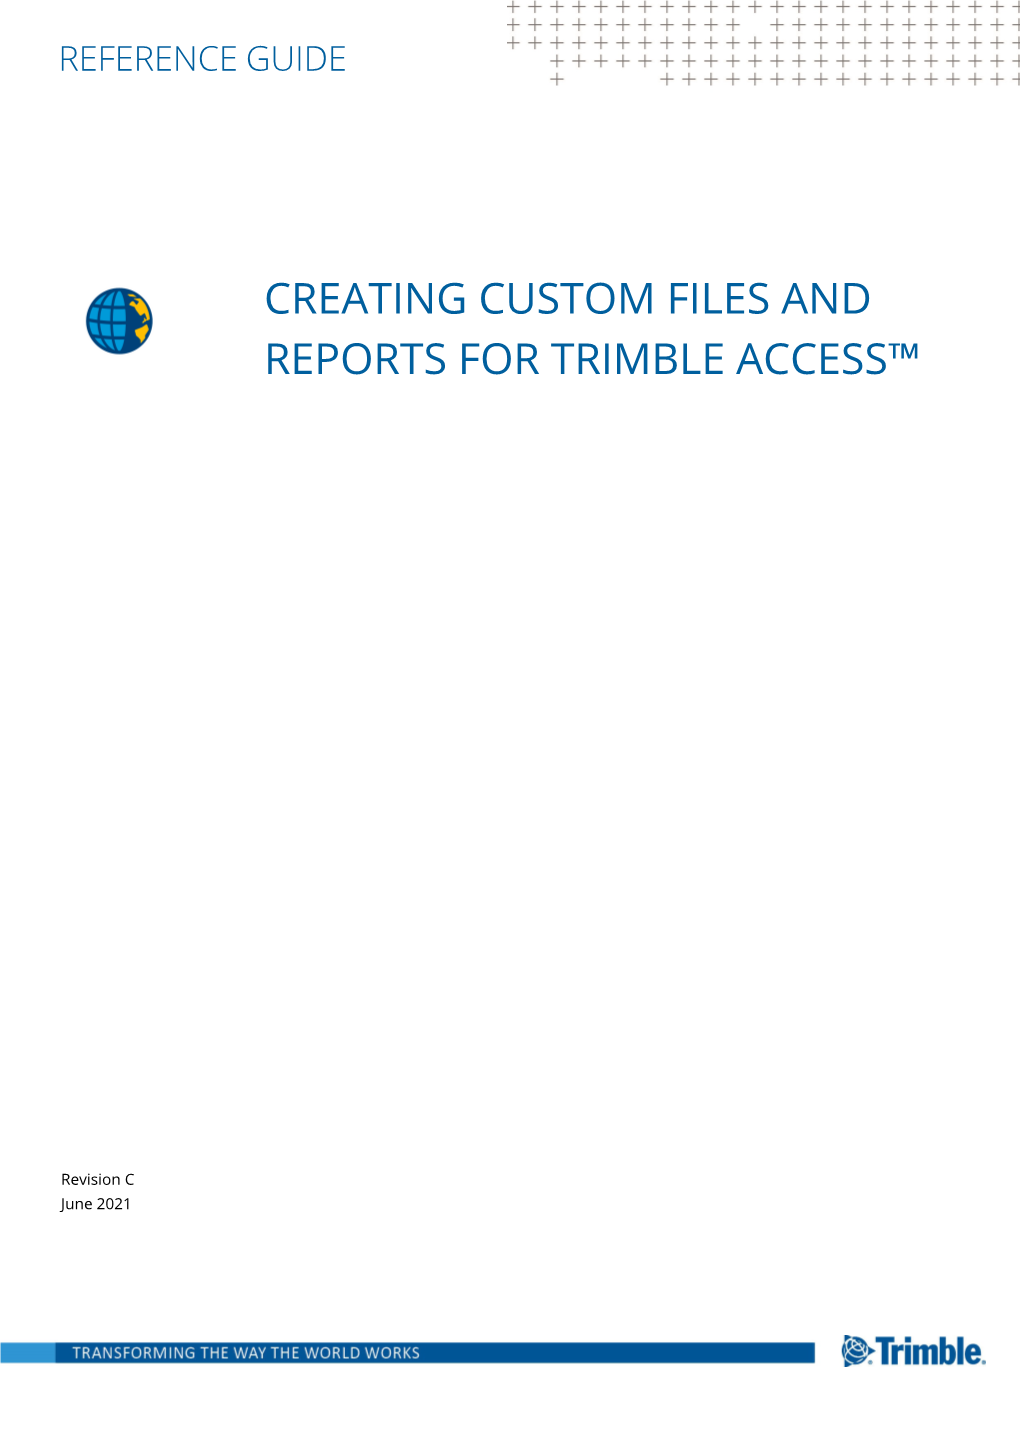 Creating Custom Files and Reports for Trimble Access Reference Guide